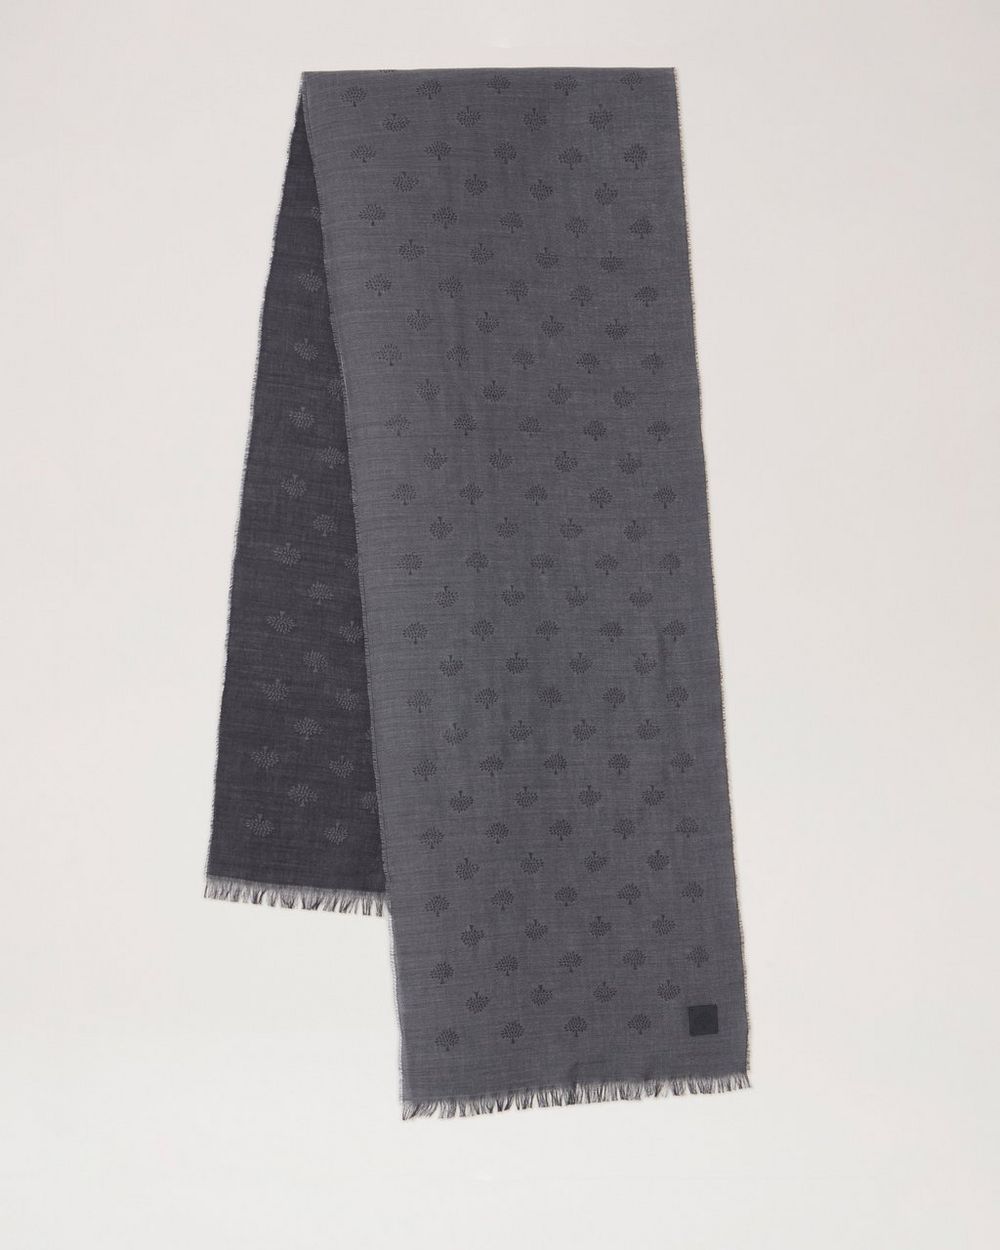 Louis Vuitton Scarves for sale in Manchester, United Kingdom